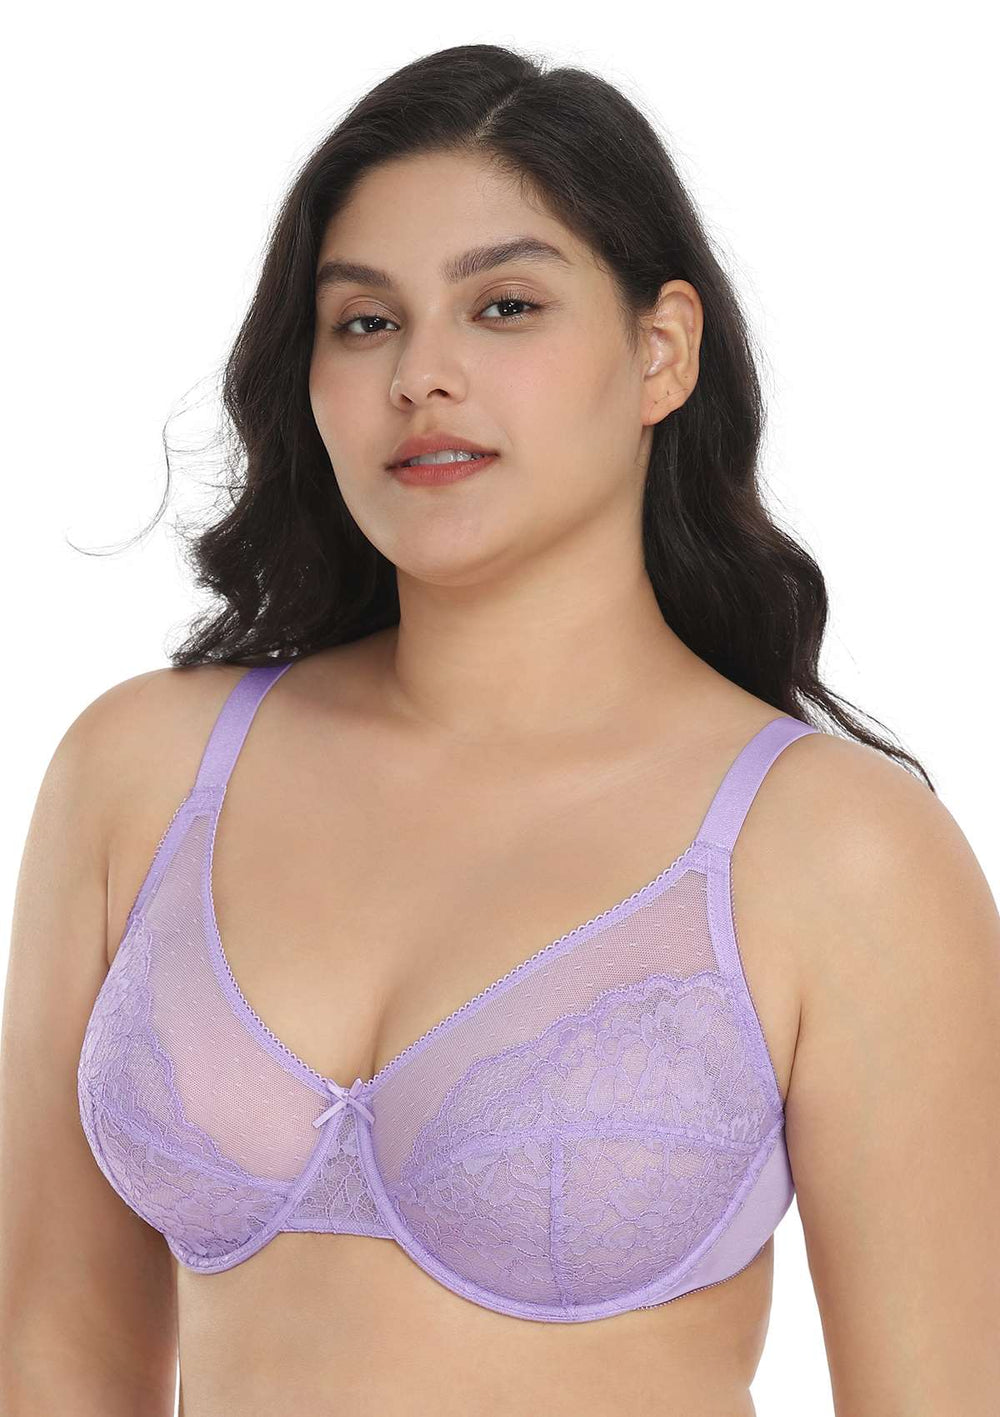 Sheer Lace Underwire Bra For Women Unlined Minimizer In Sizes 34